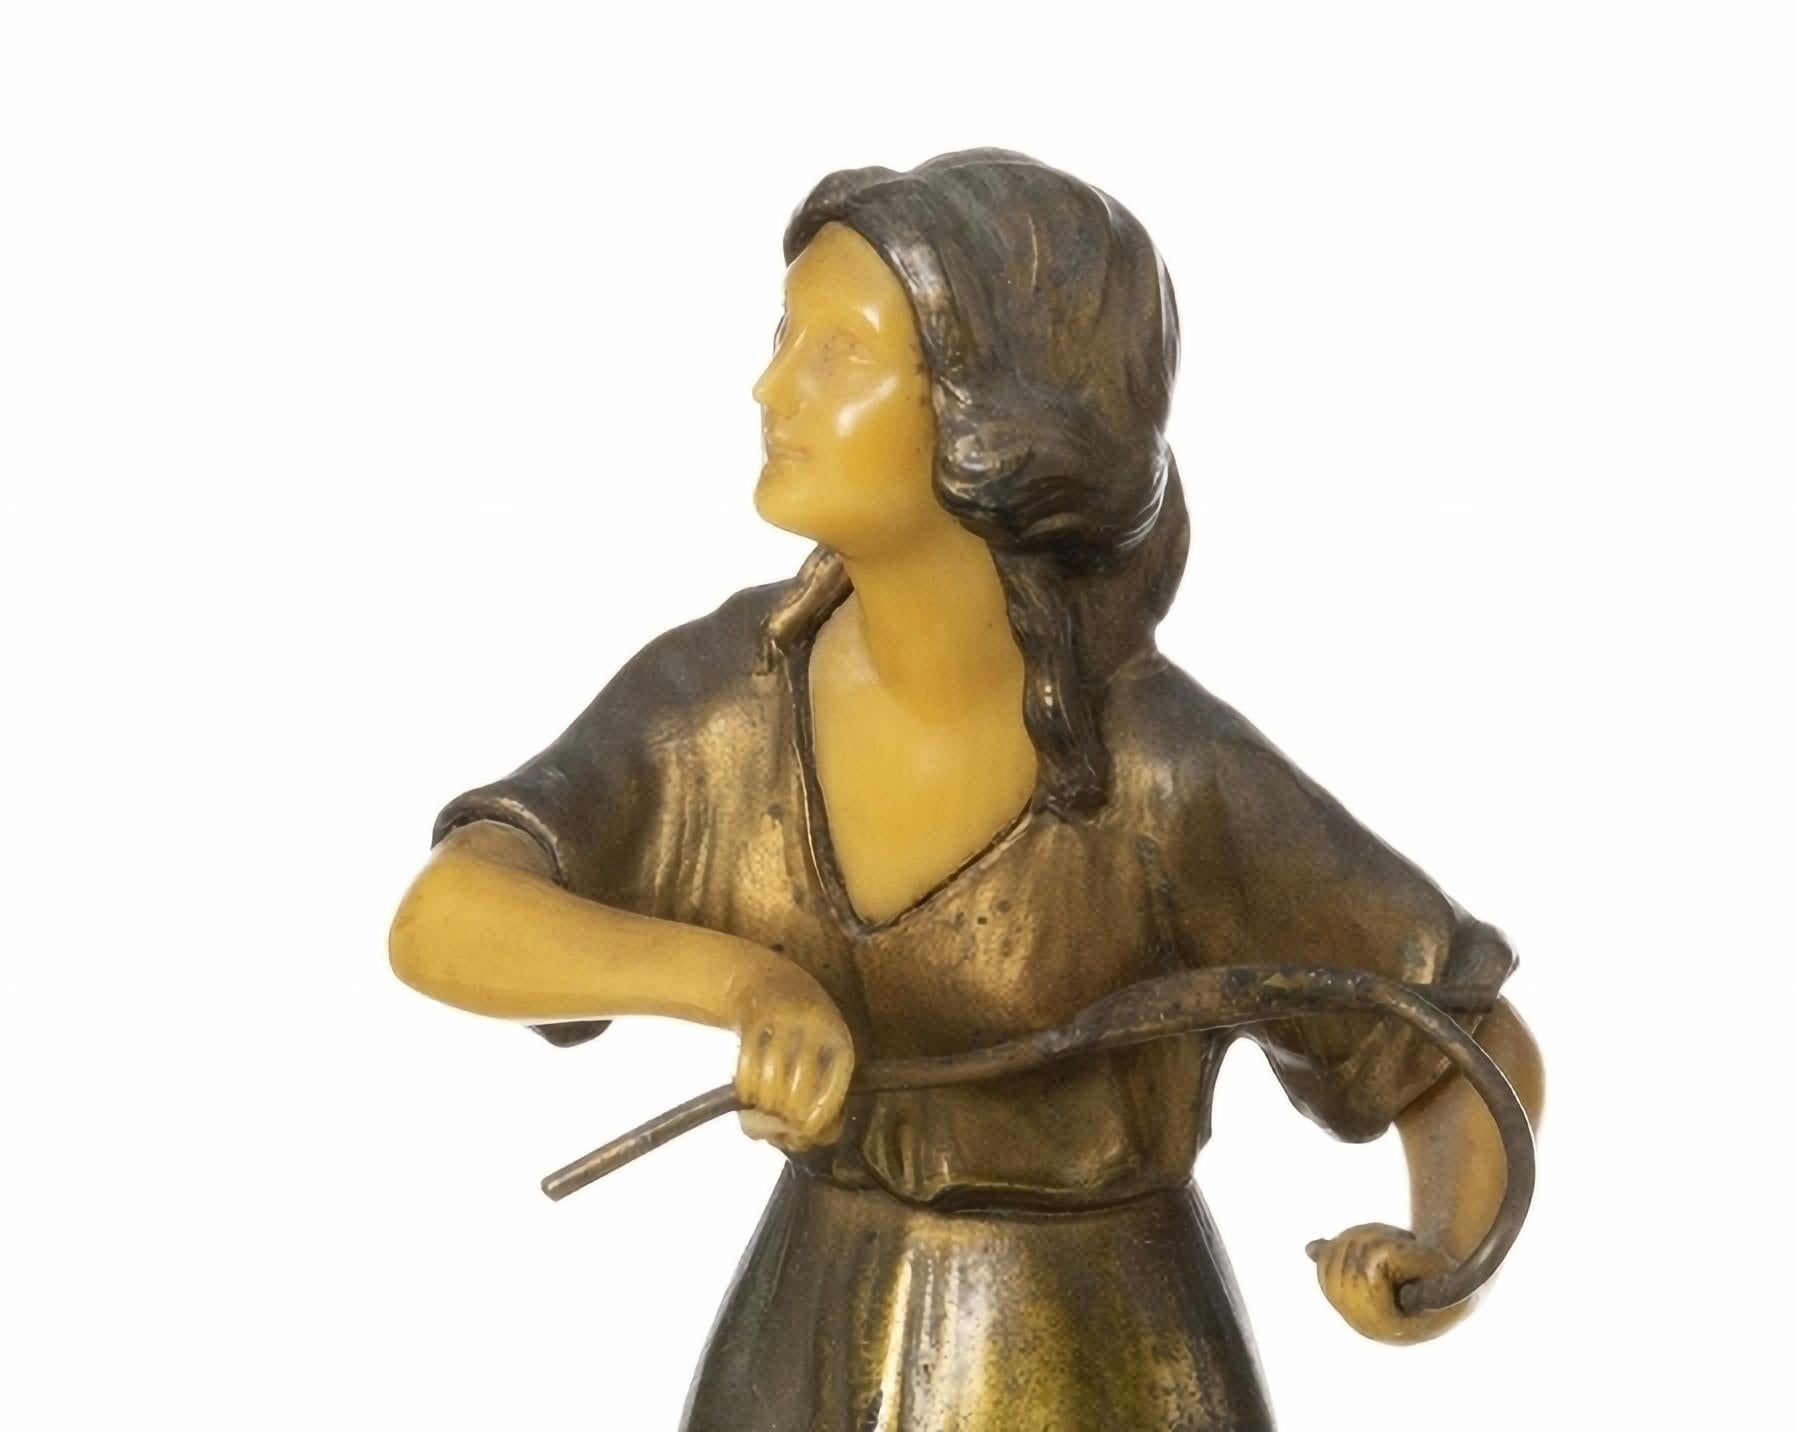 French female figure Art Deco, early 20th century.

Sculpture
in bronze and bakelite.
Standing on a marble base.
Dec. height: (sculpture) 16 cm;
(total) 21 cm
Good conditions.